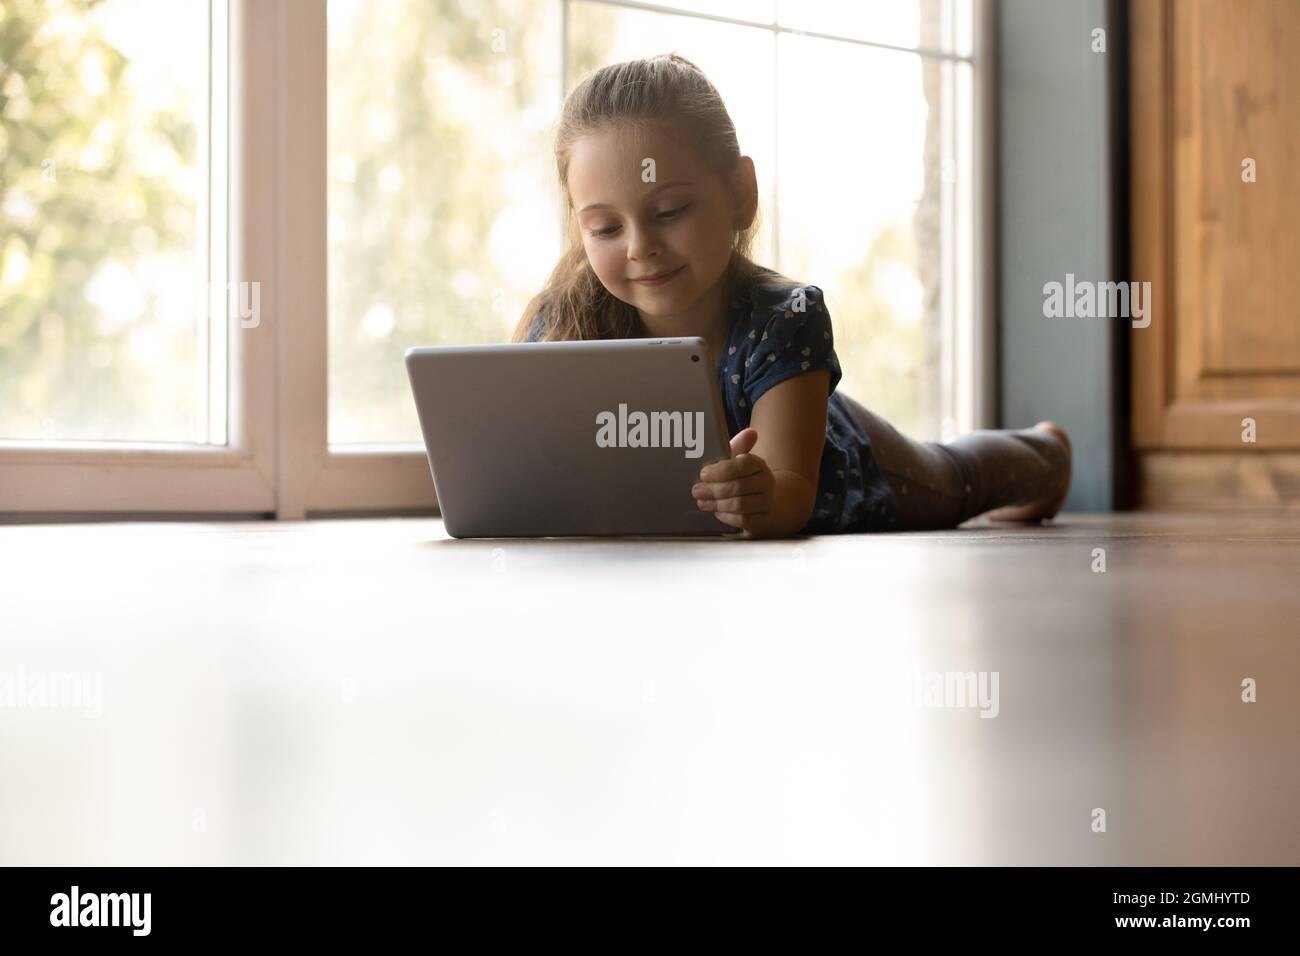 Happy adorable small child girl using digital computer tablet. Stock Photo